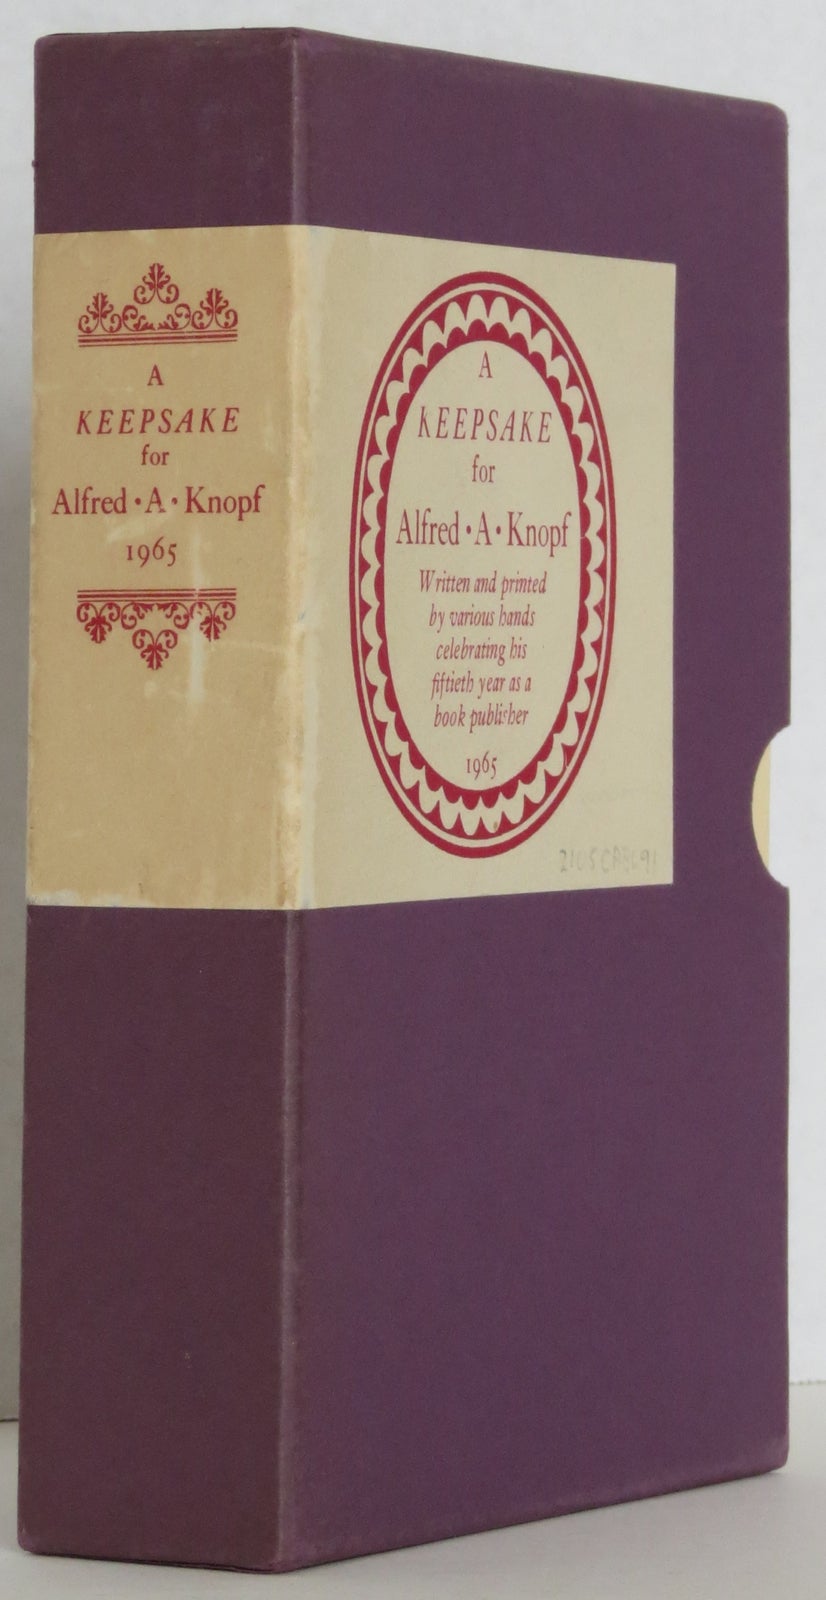 A Keepsake for Alfred A. Knopf, Charles Antin, compiler